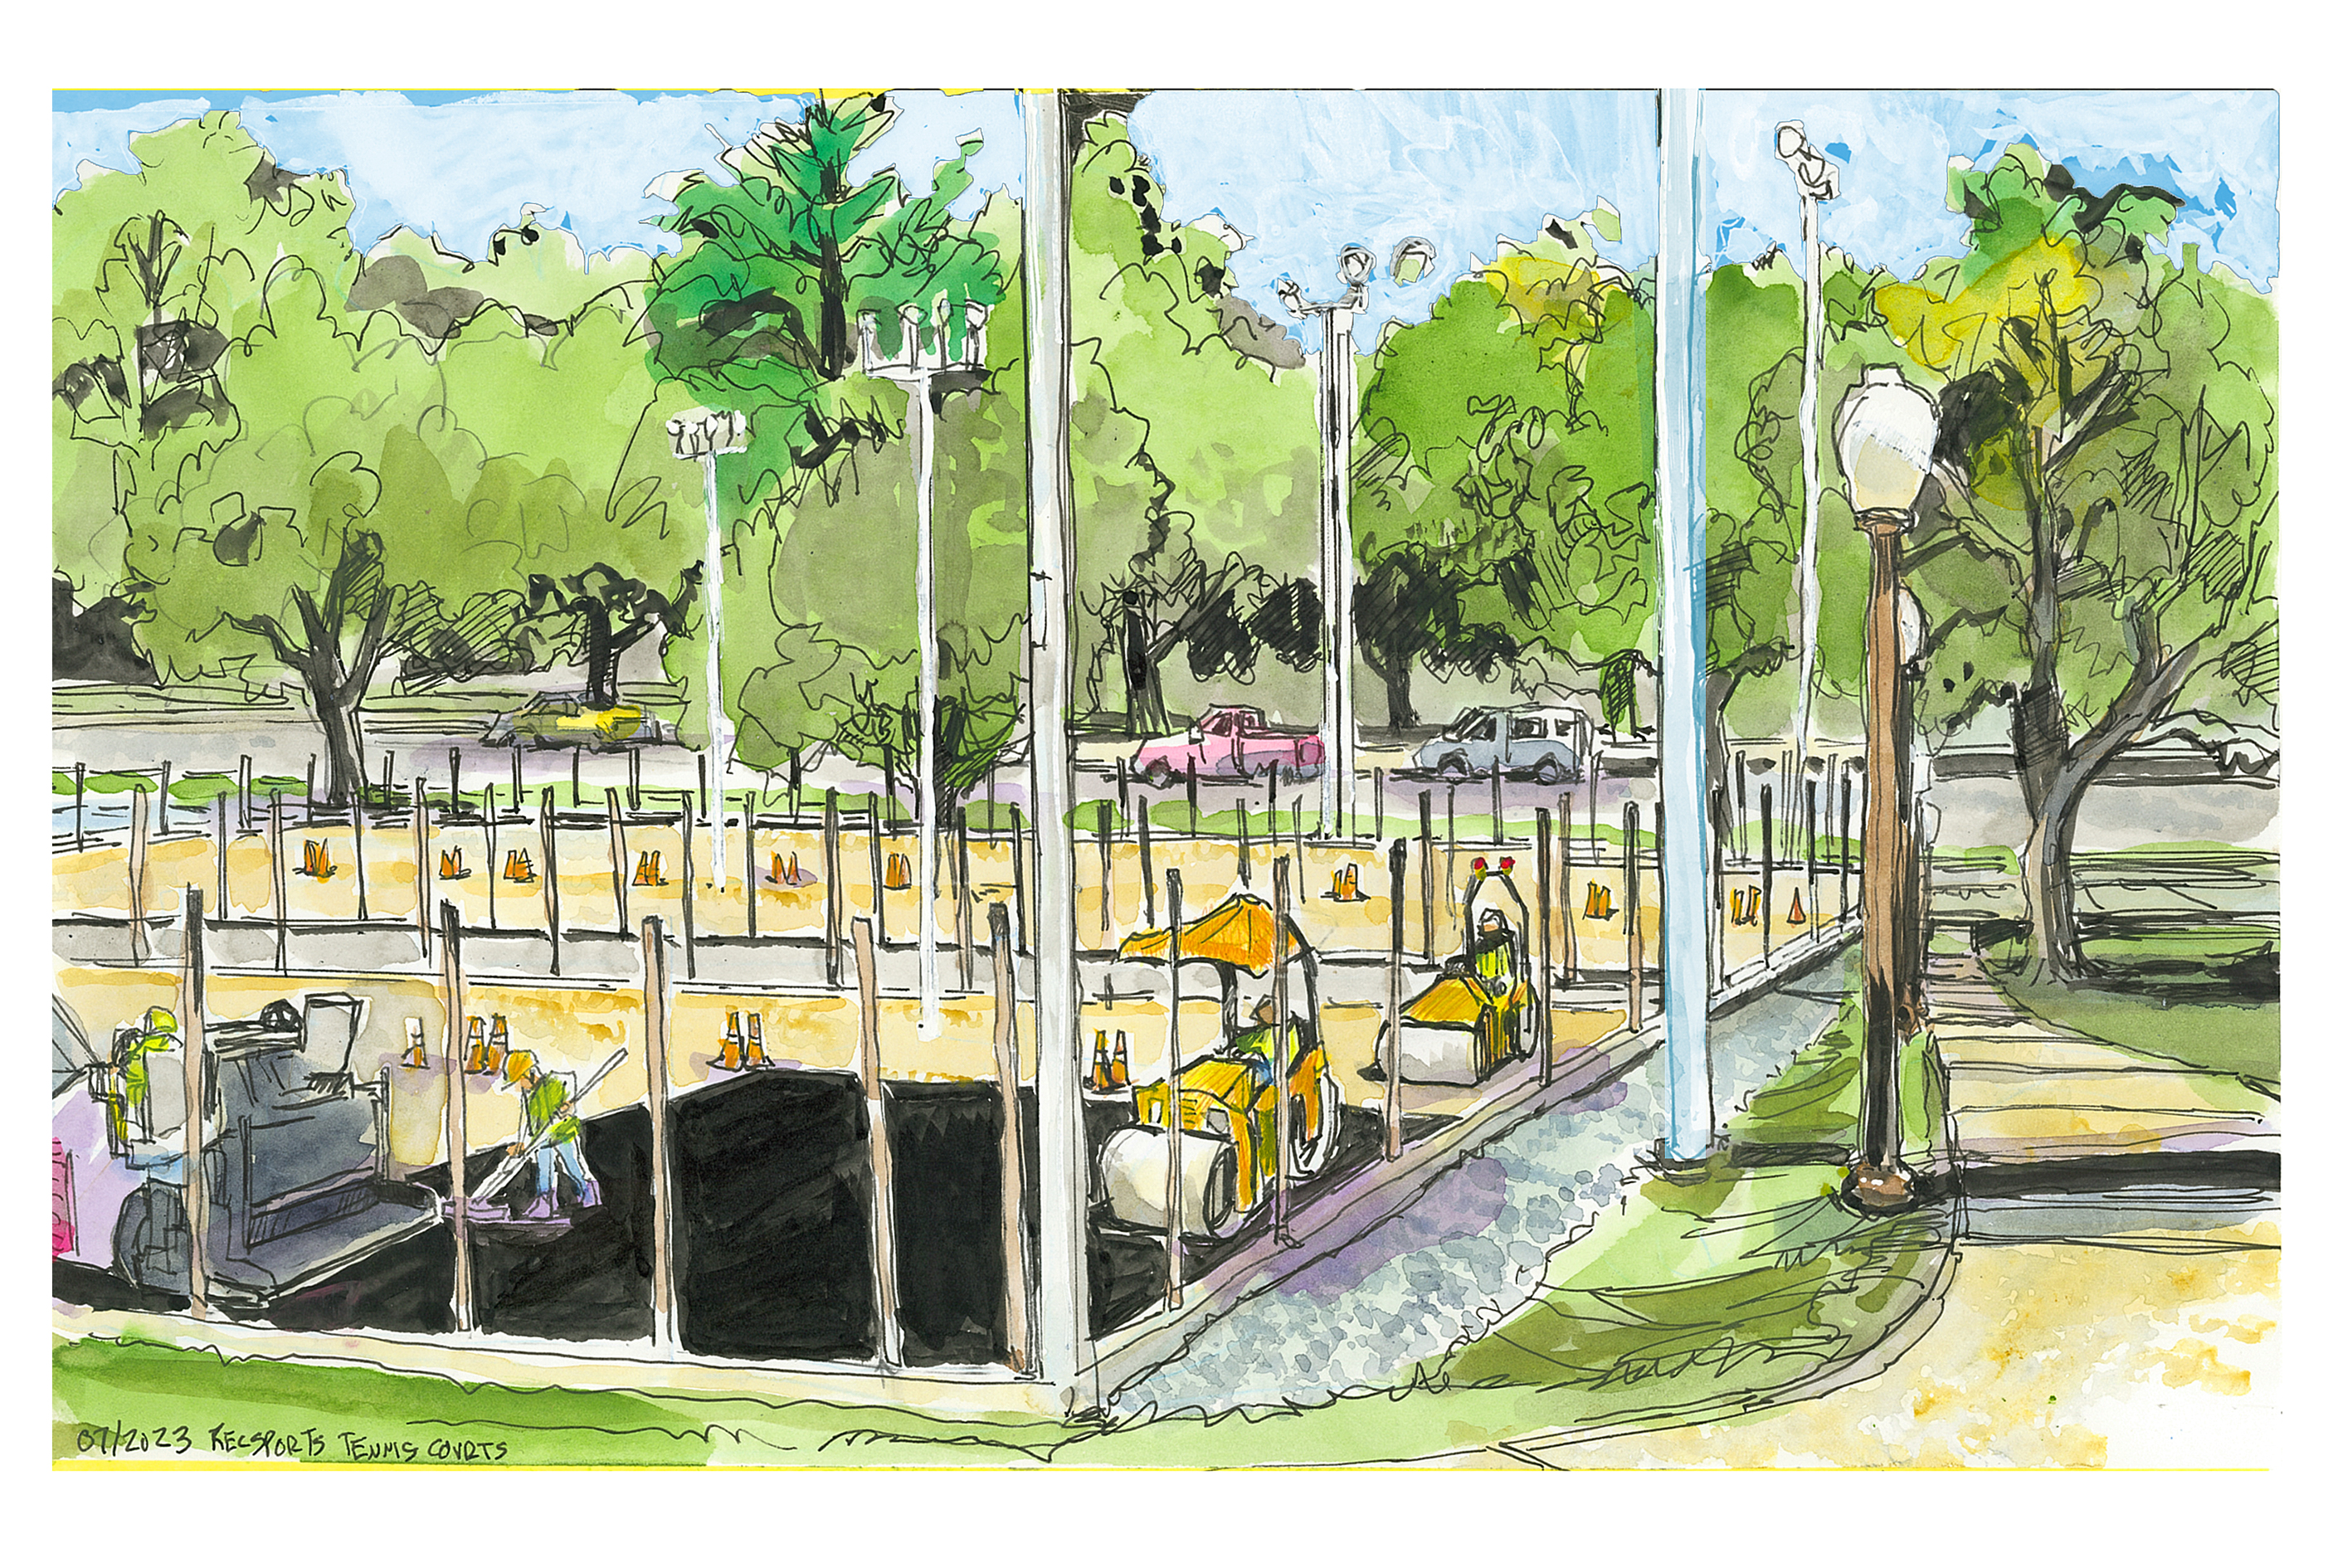 Ink and watercolor sketch of the resurfacing of the recsports washington street tennis courts